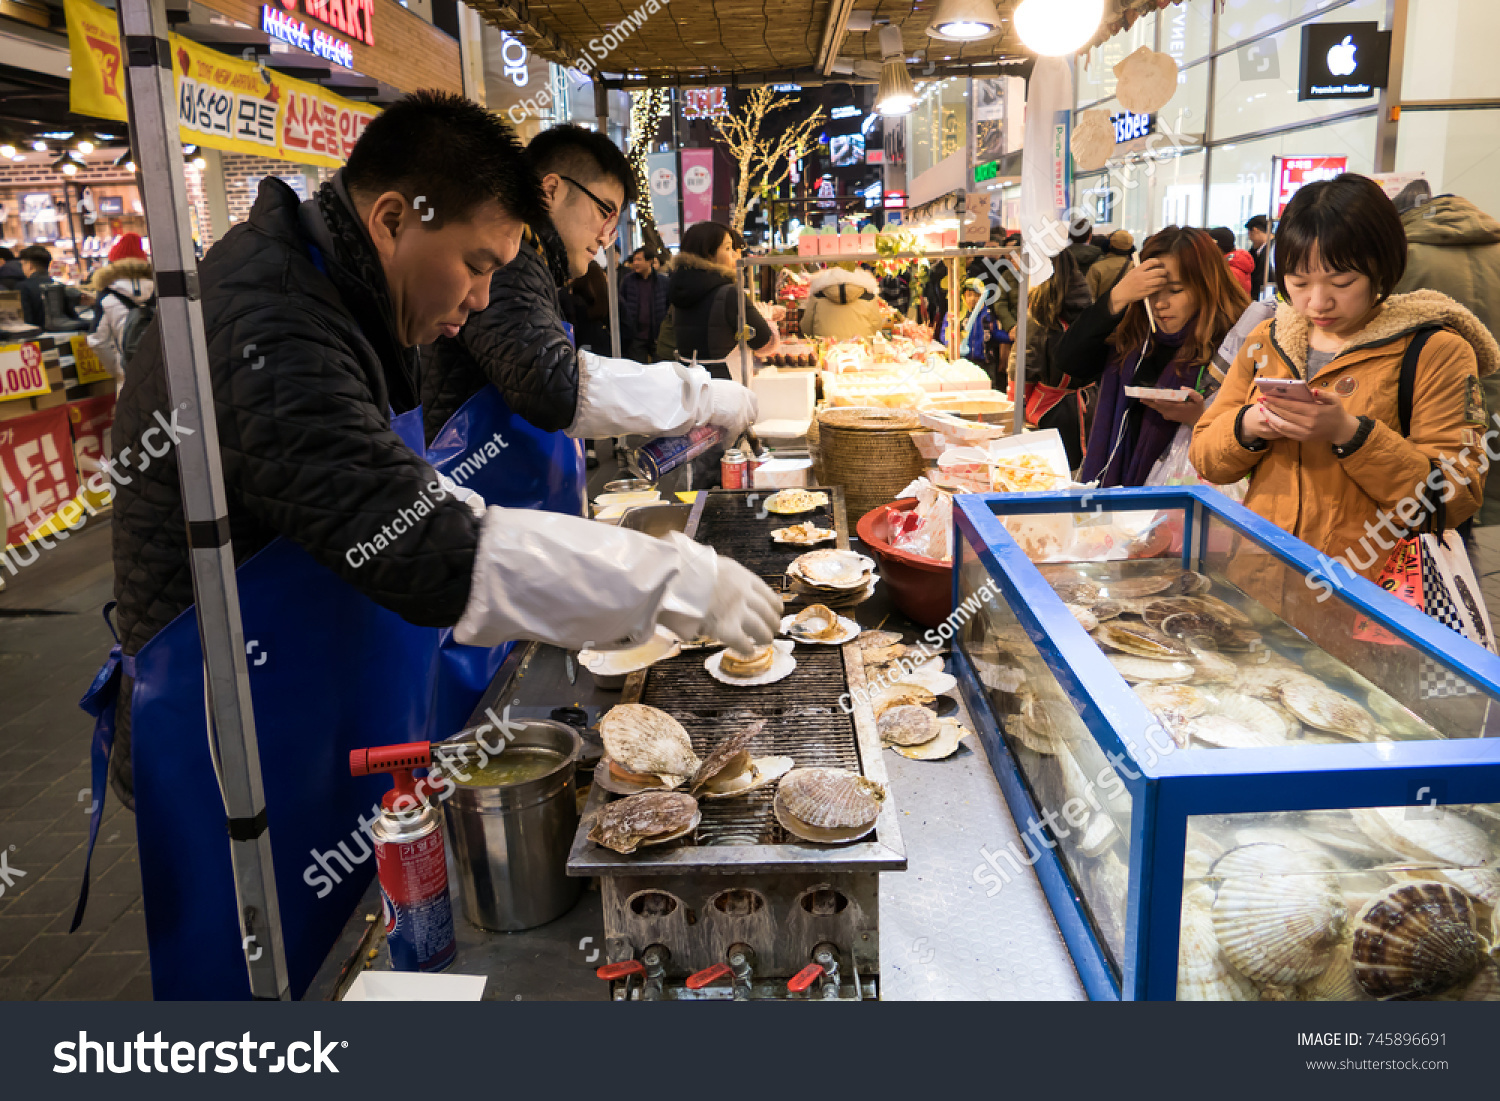 Seoul January 30 Food Myeongdong Market Stock Photo Edit Now 745896691 Find the perfect myeongdong market in seoul south stock photo. shutterstock